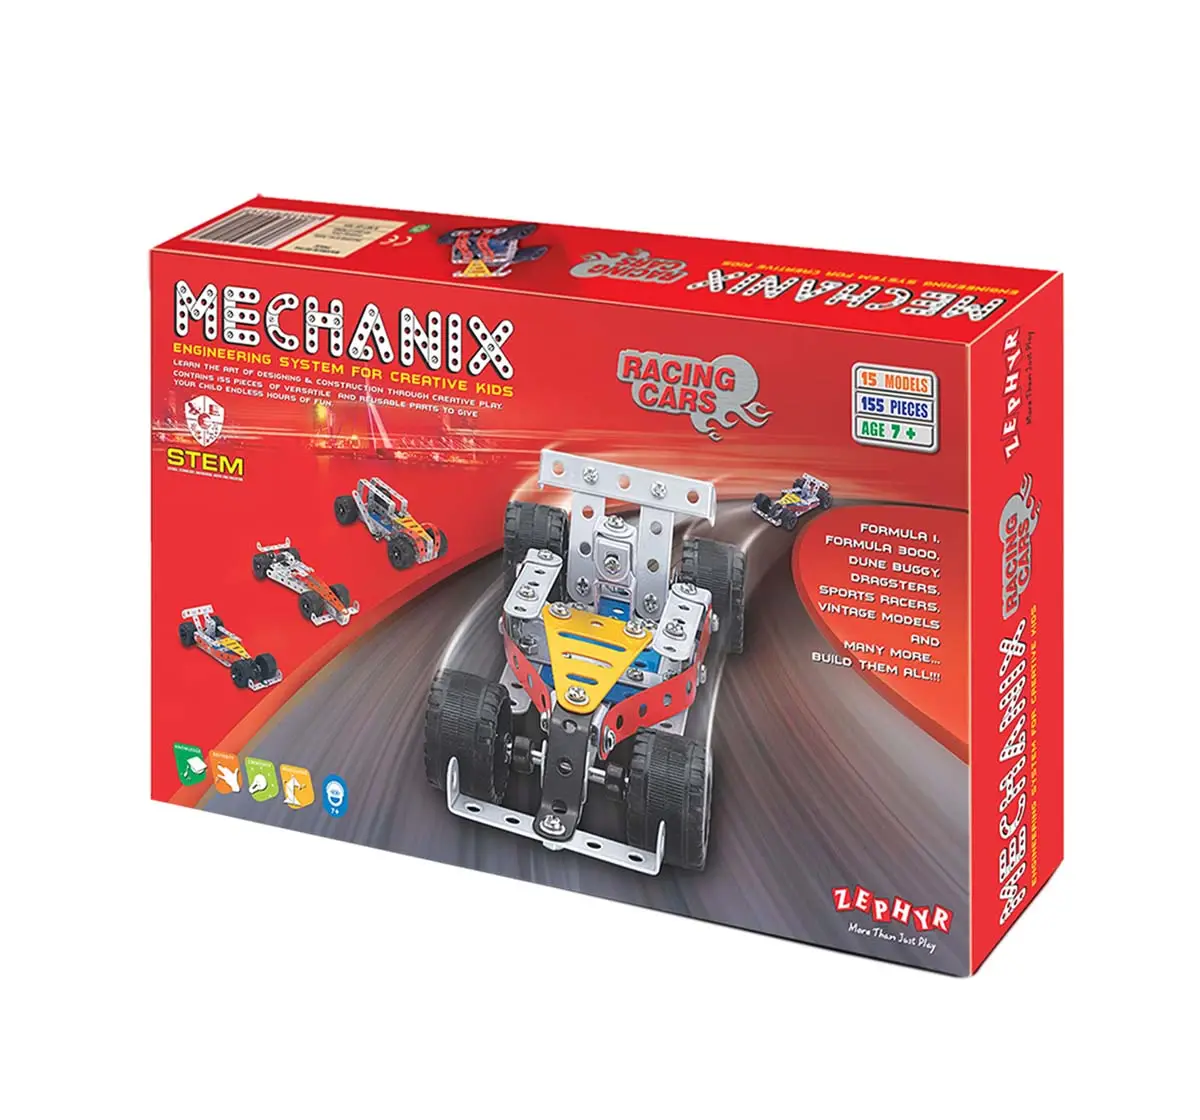 Zephyr Metal Mechanix Racing Cars Construction Sets for age 7Y+ 